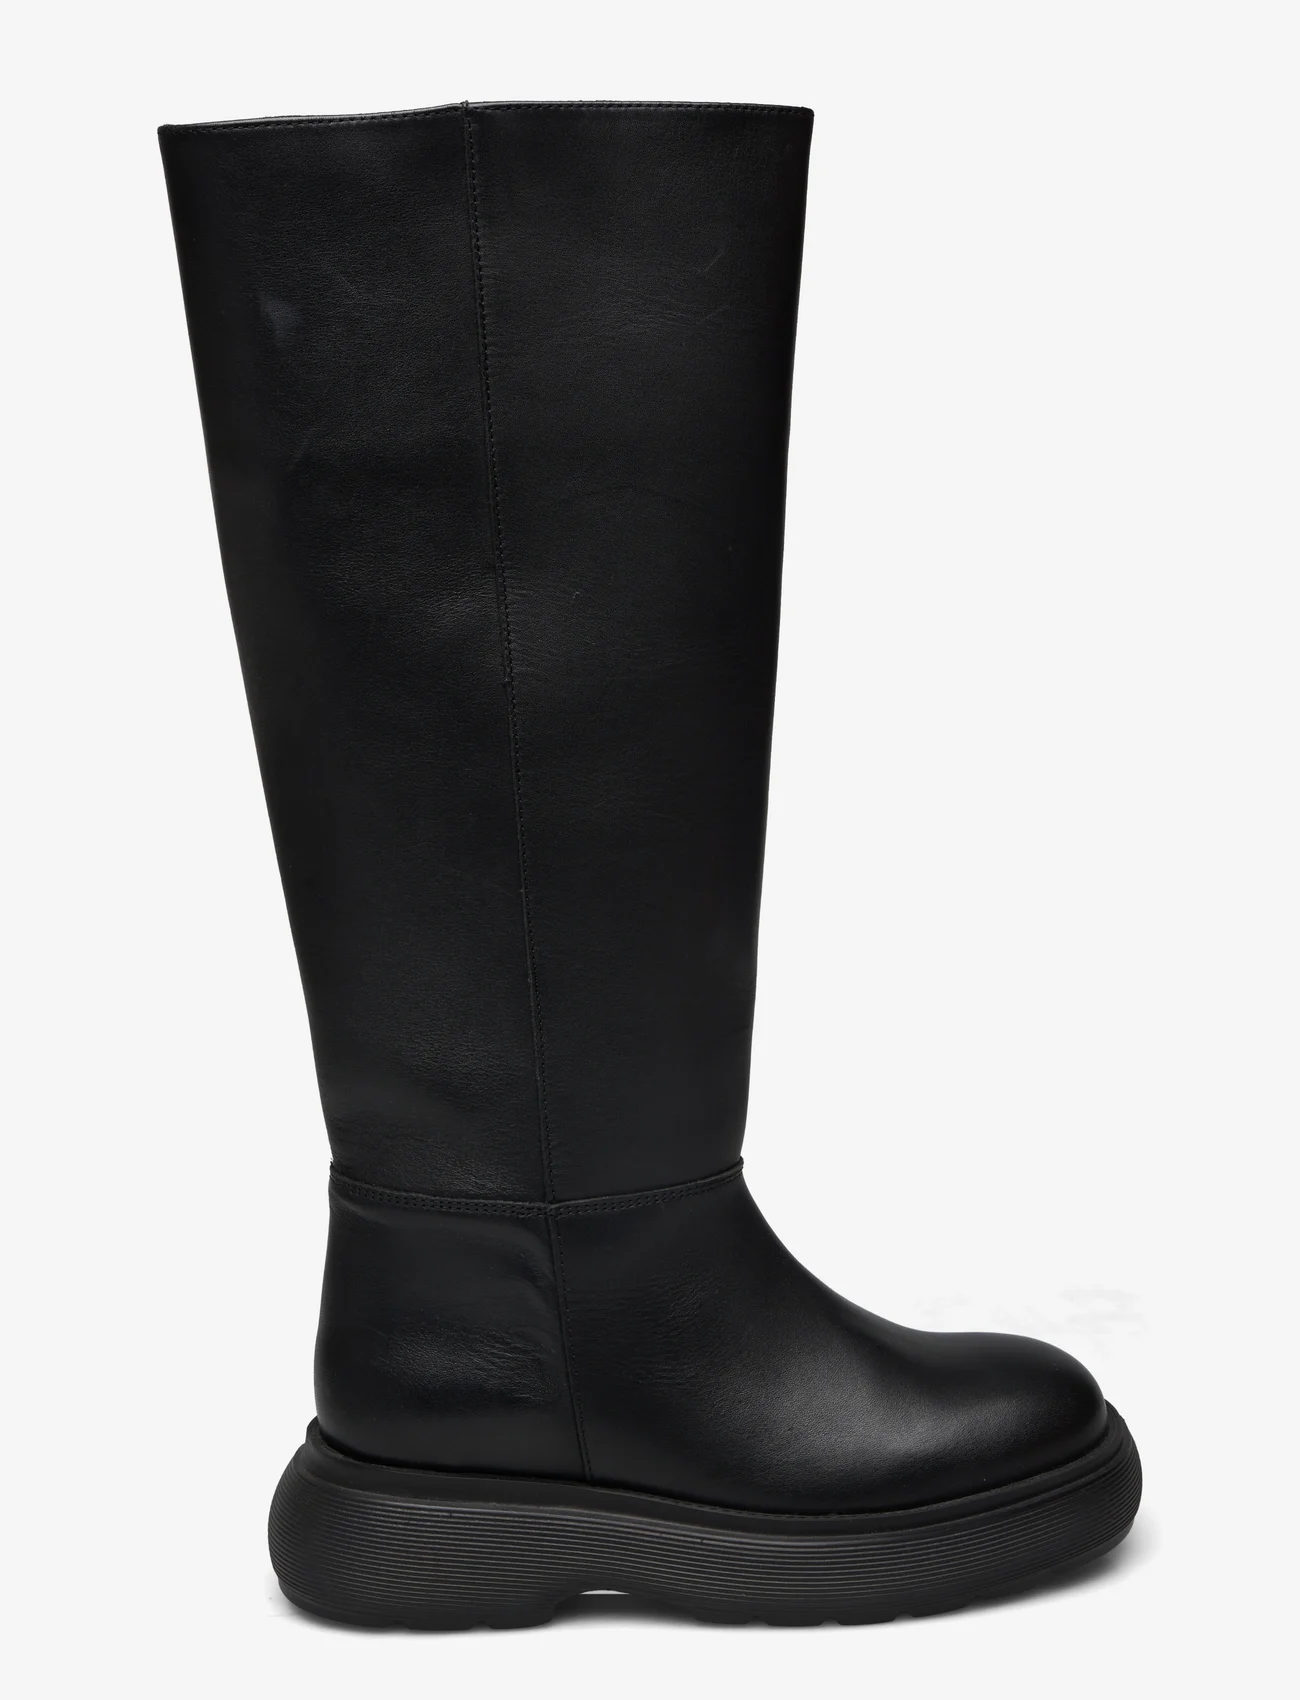 Garment Project - Cloud High Boot - Black Leather - kniehohe stiefel - black - 1